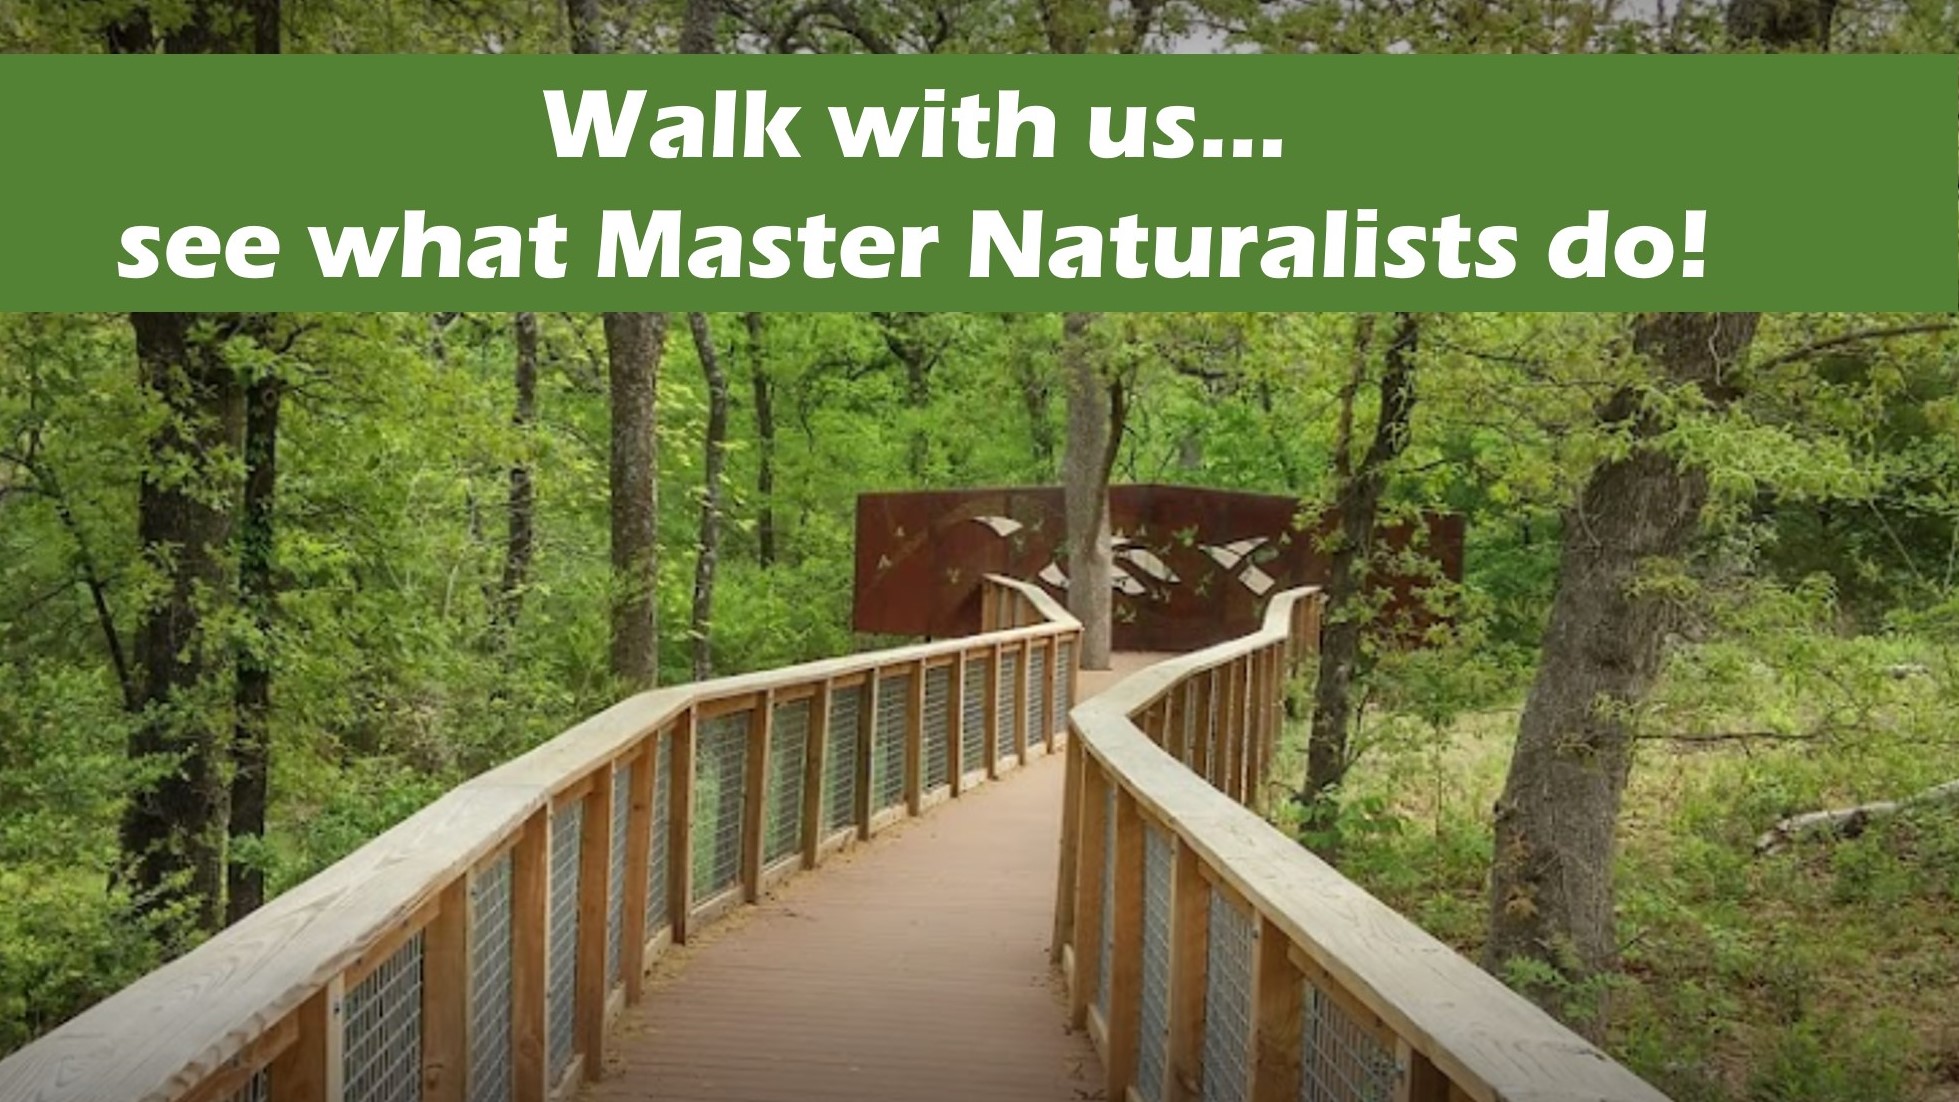 Walk with us and see what Master Naturalists do